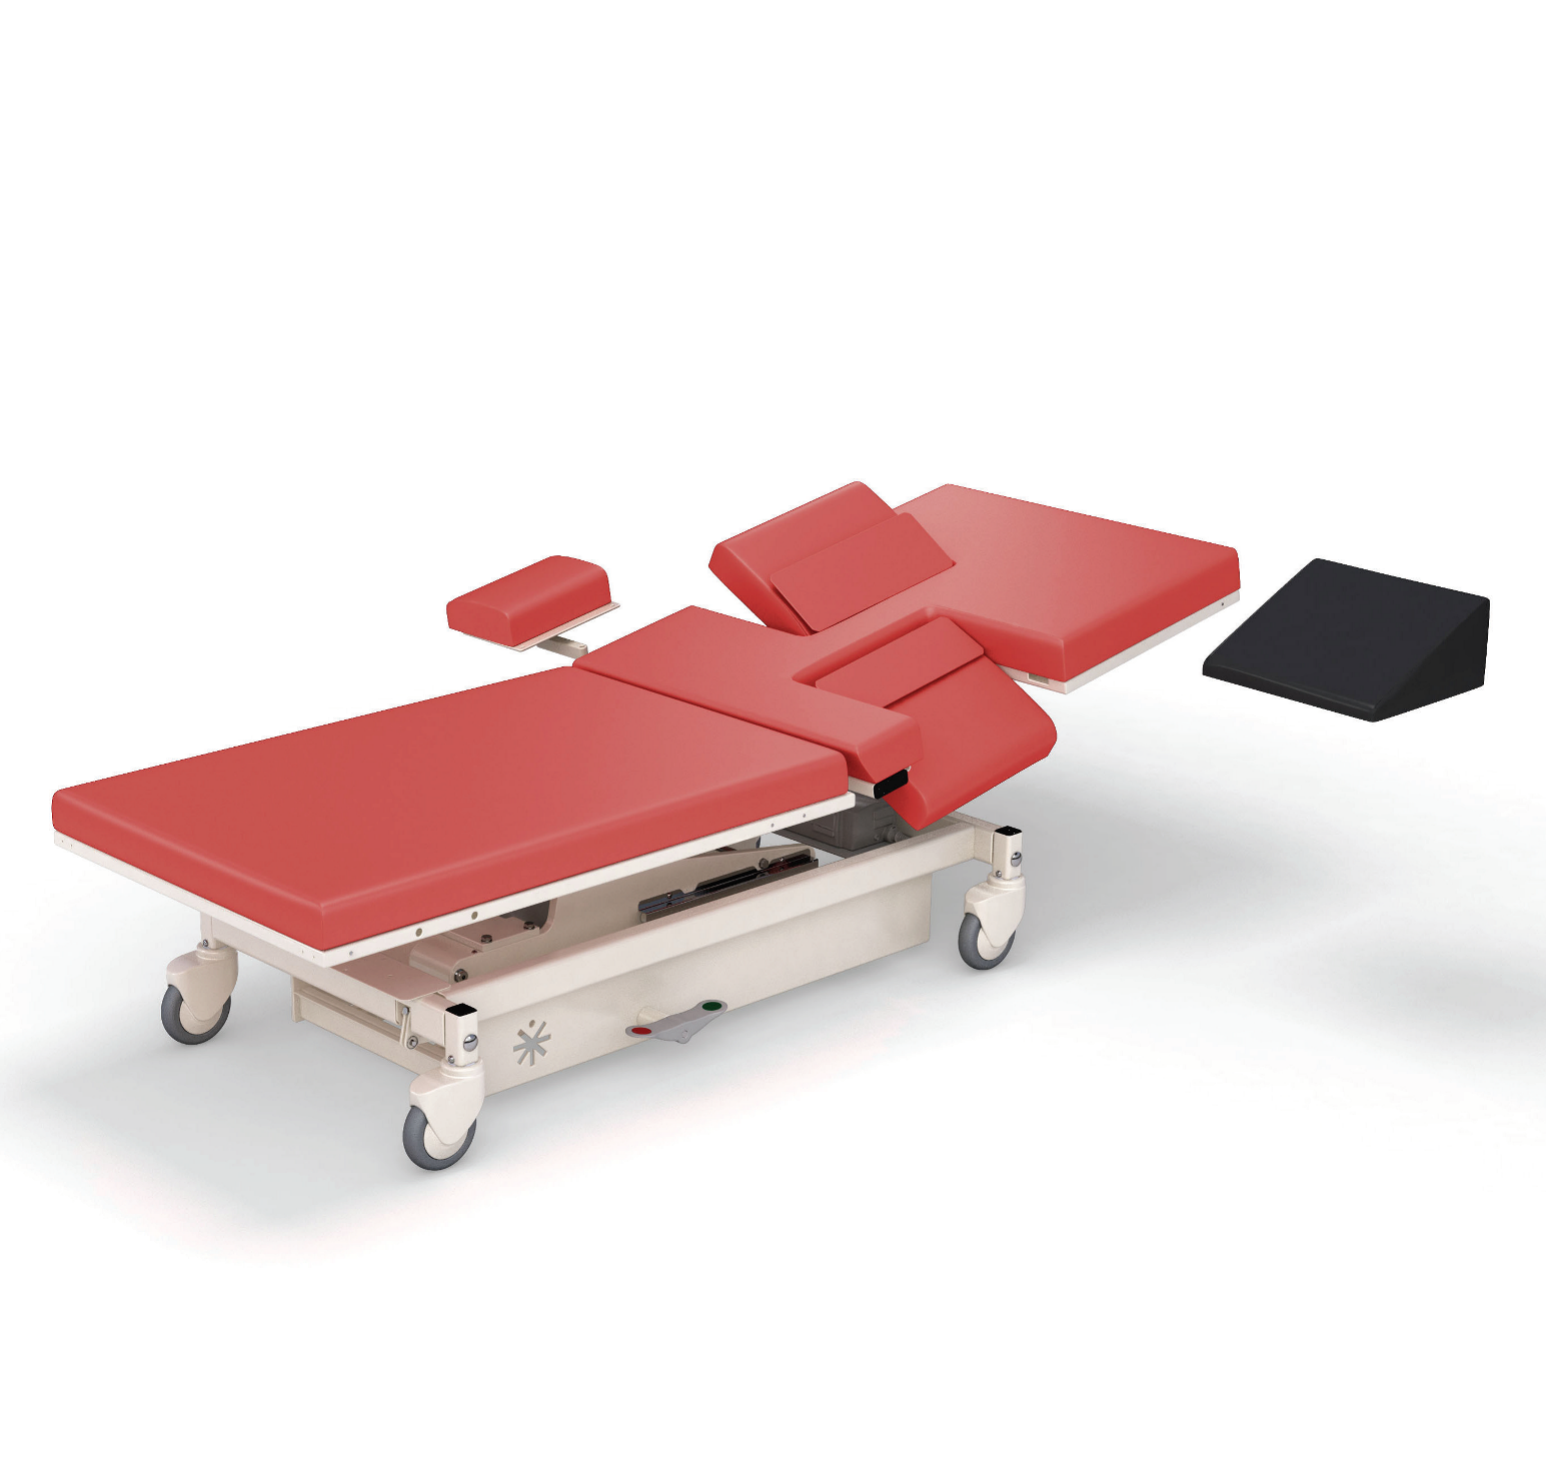 Echocardiography Bed - EchoBed® X from Medical Positioning